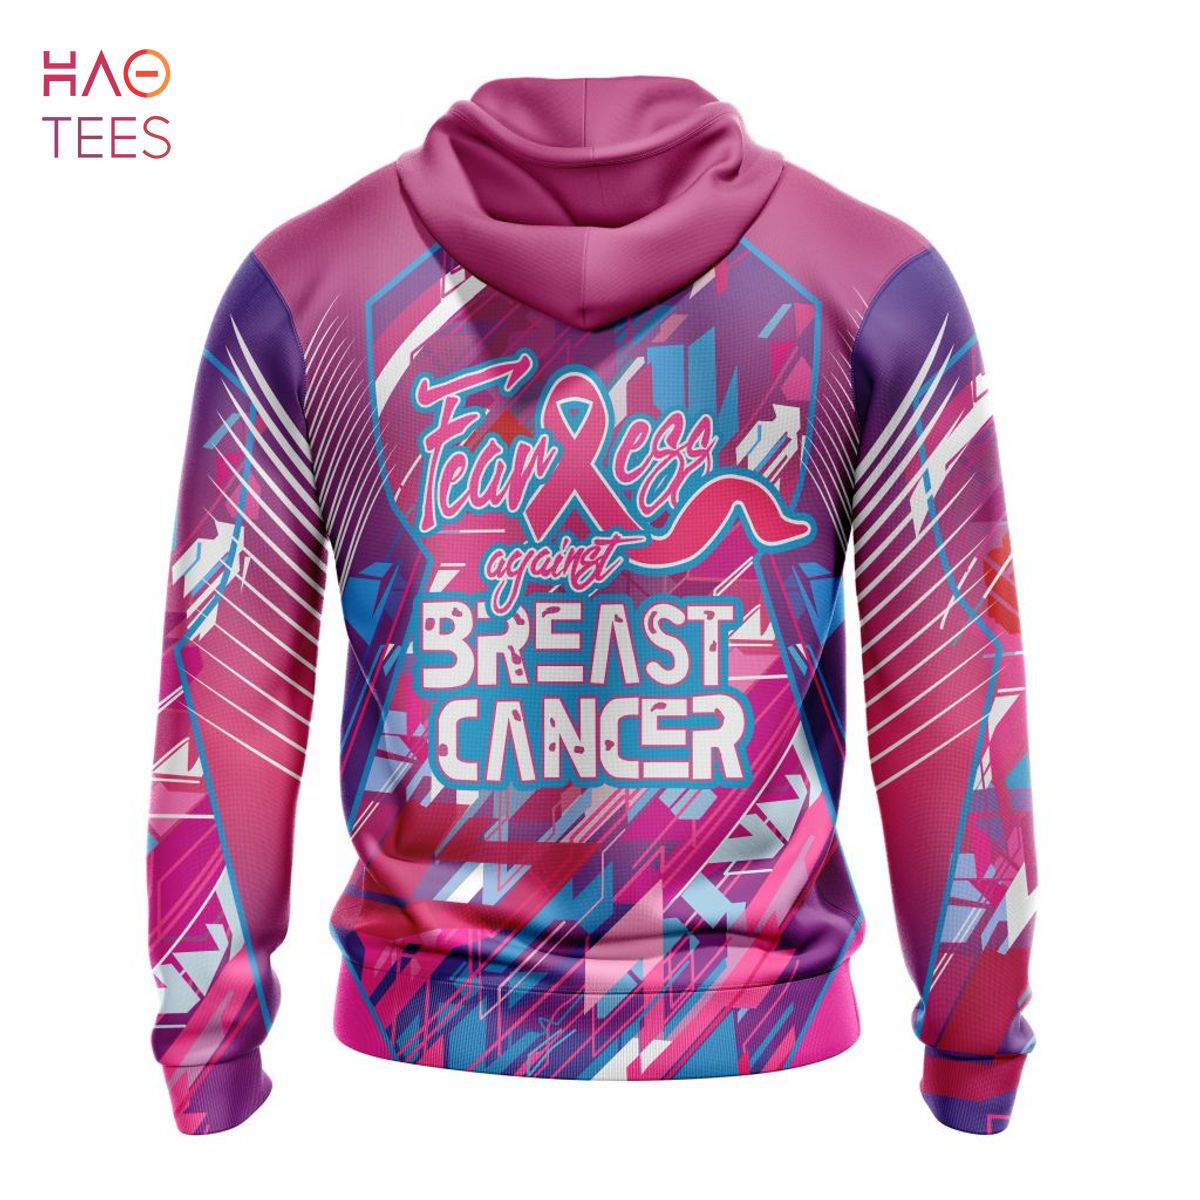 BEST NFL Cleveland Browns, Specialized Design I Pink I Can! Fearless Again Breast Cancer 3D Hoodie